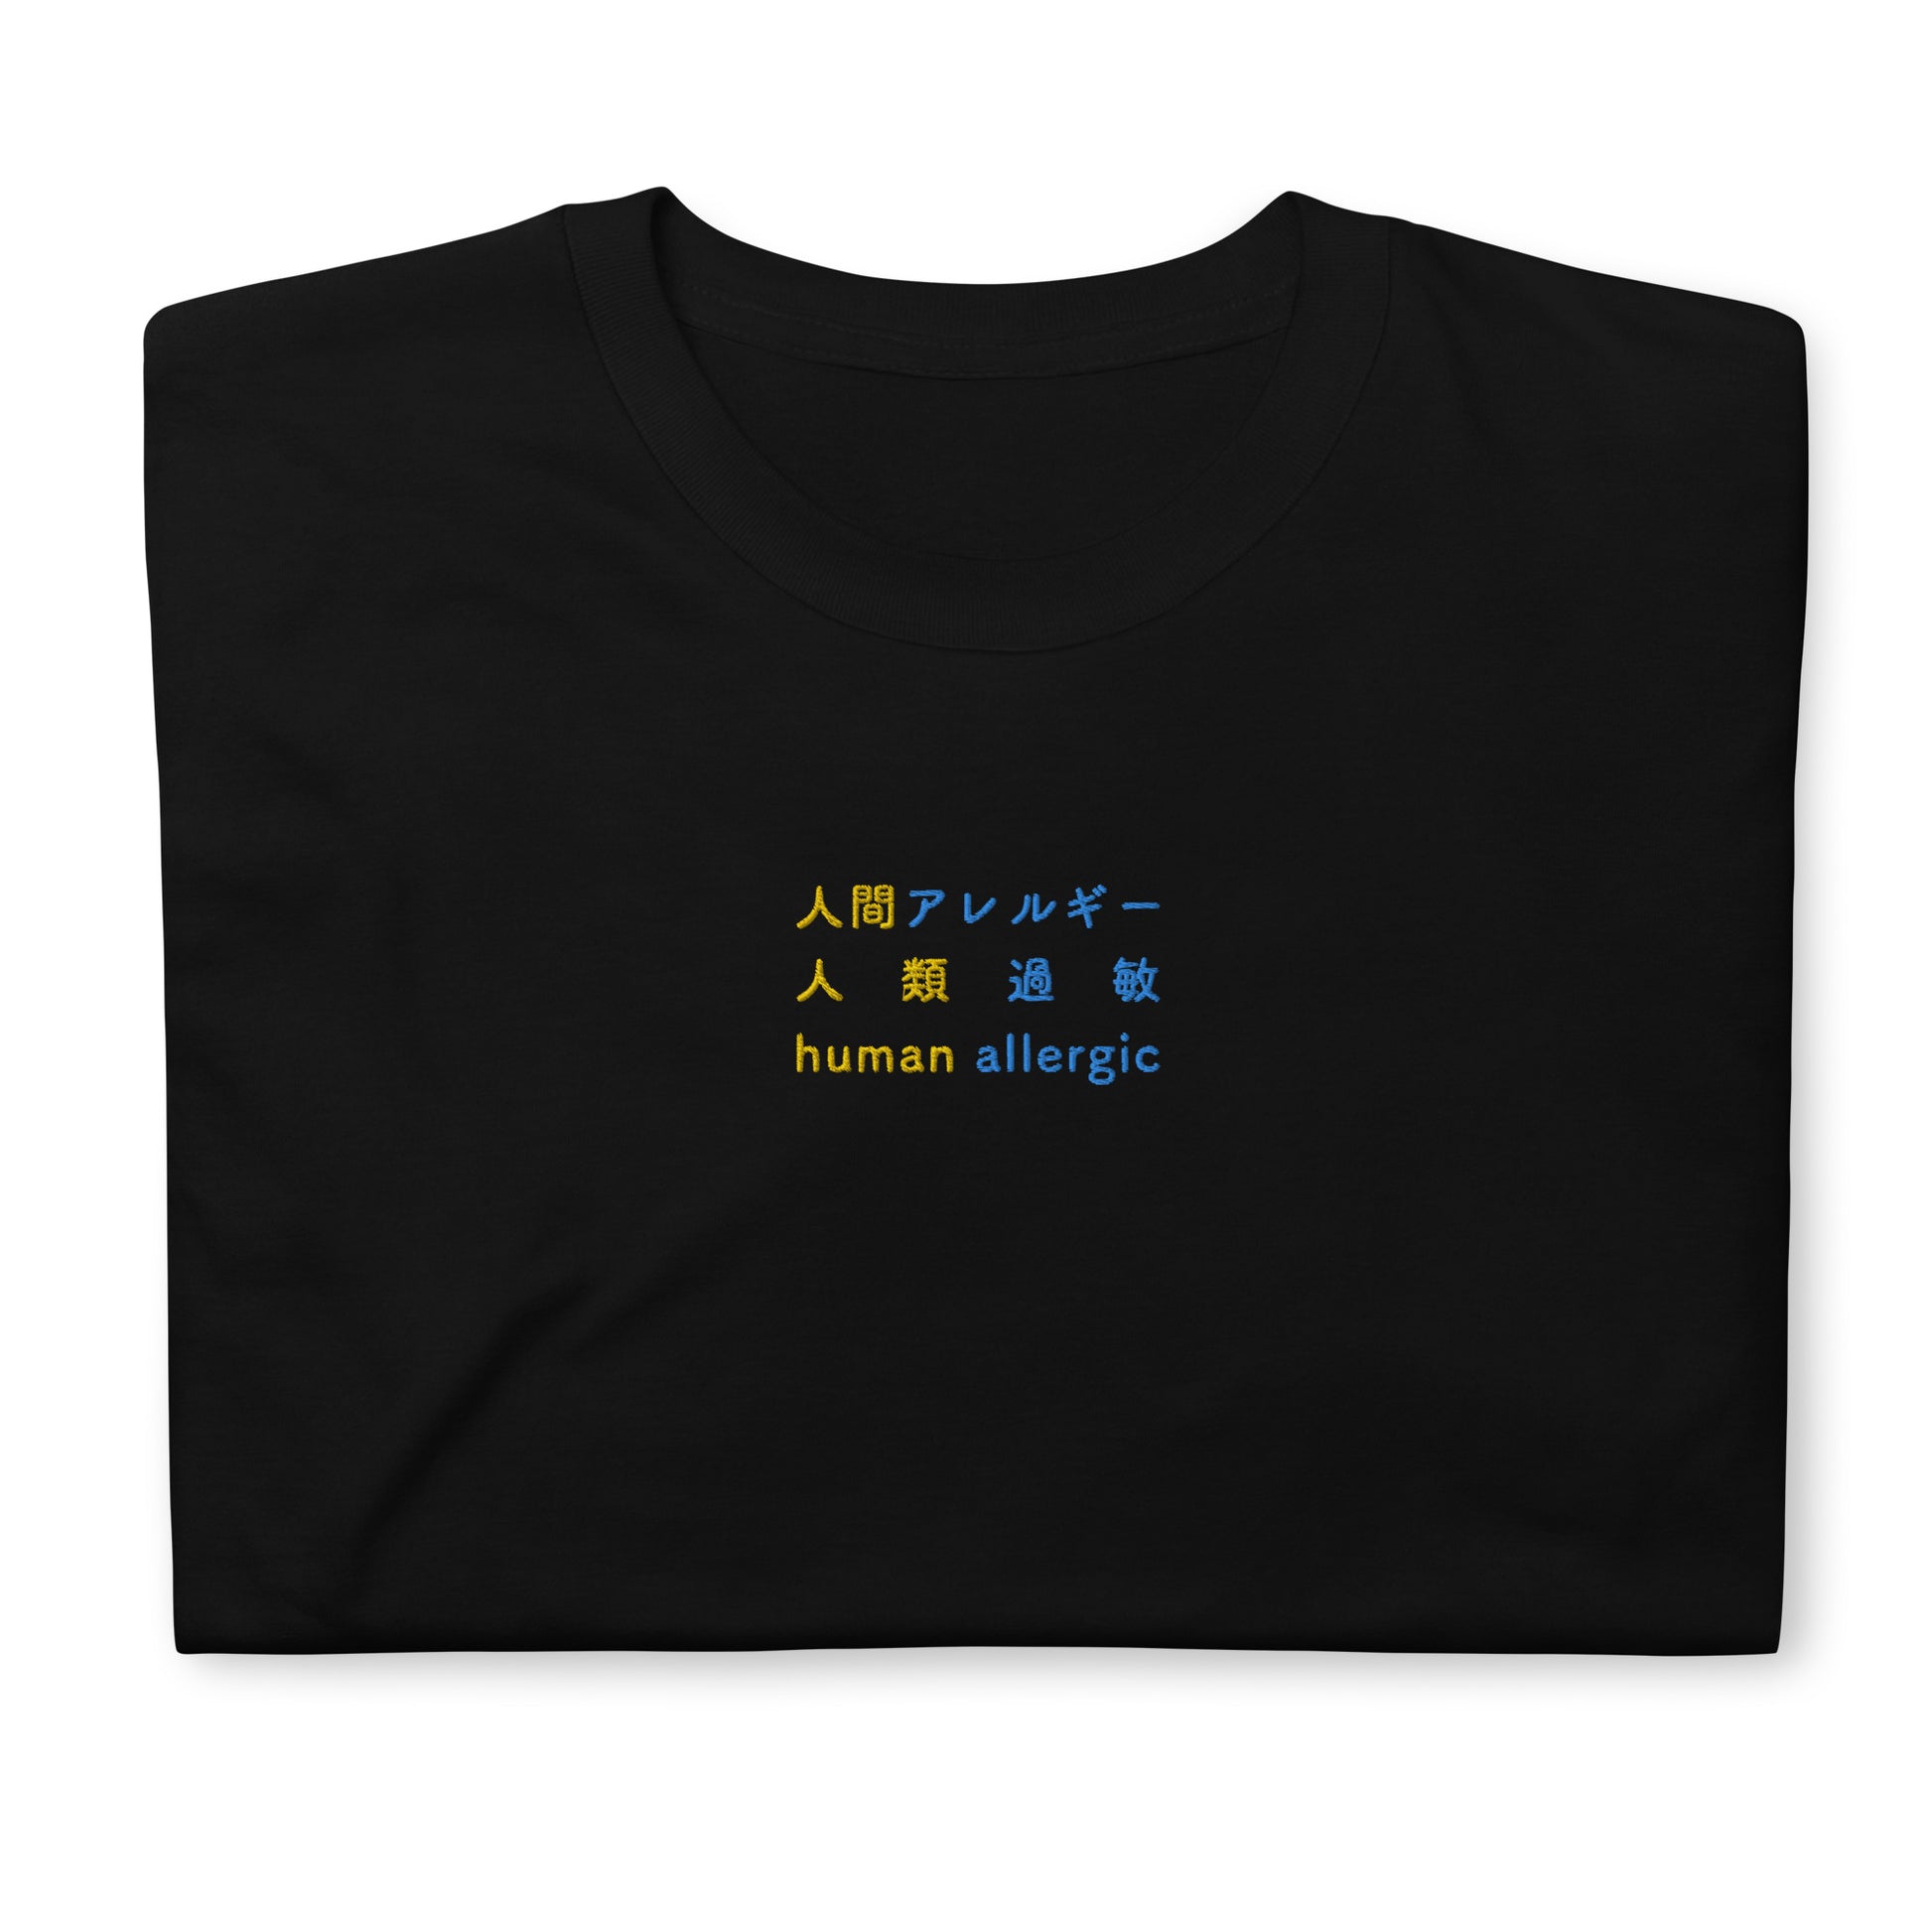 Black High Quality Tee - Front Design with an Yellow, Blue Embroidery "Human Allergic" in Japanese,Chinese and English